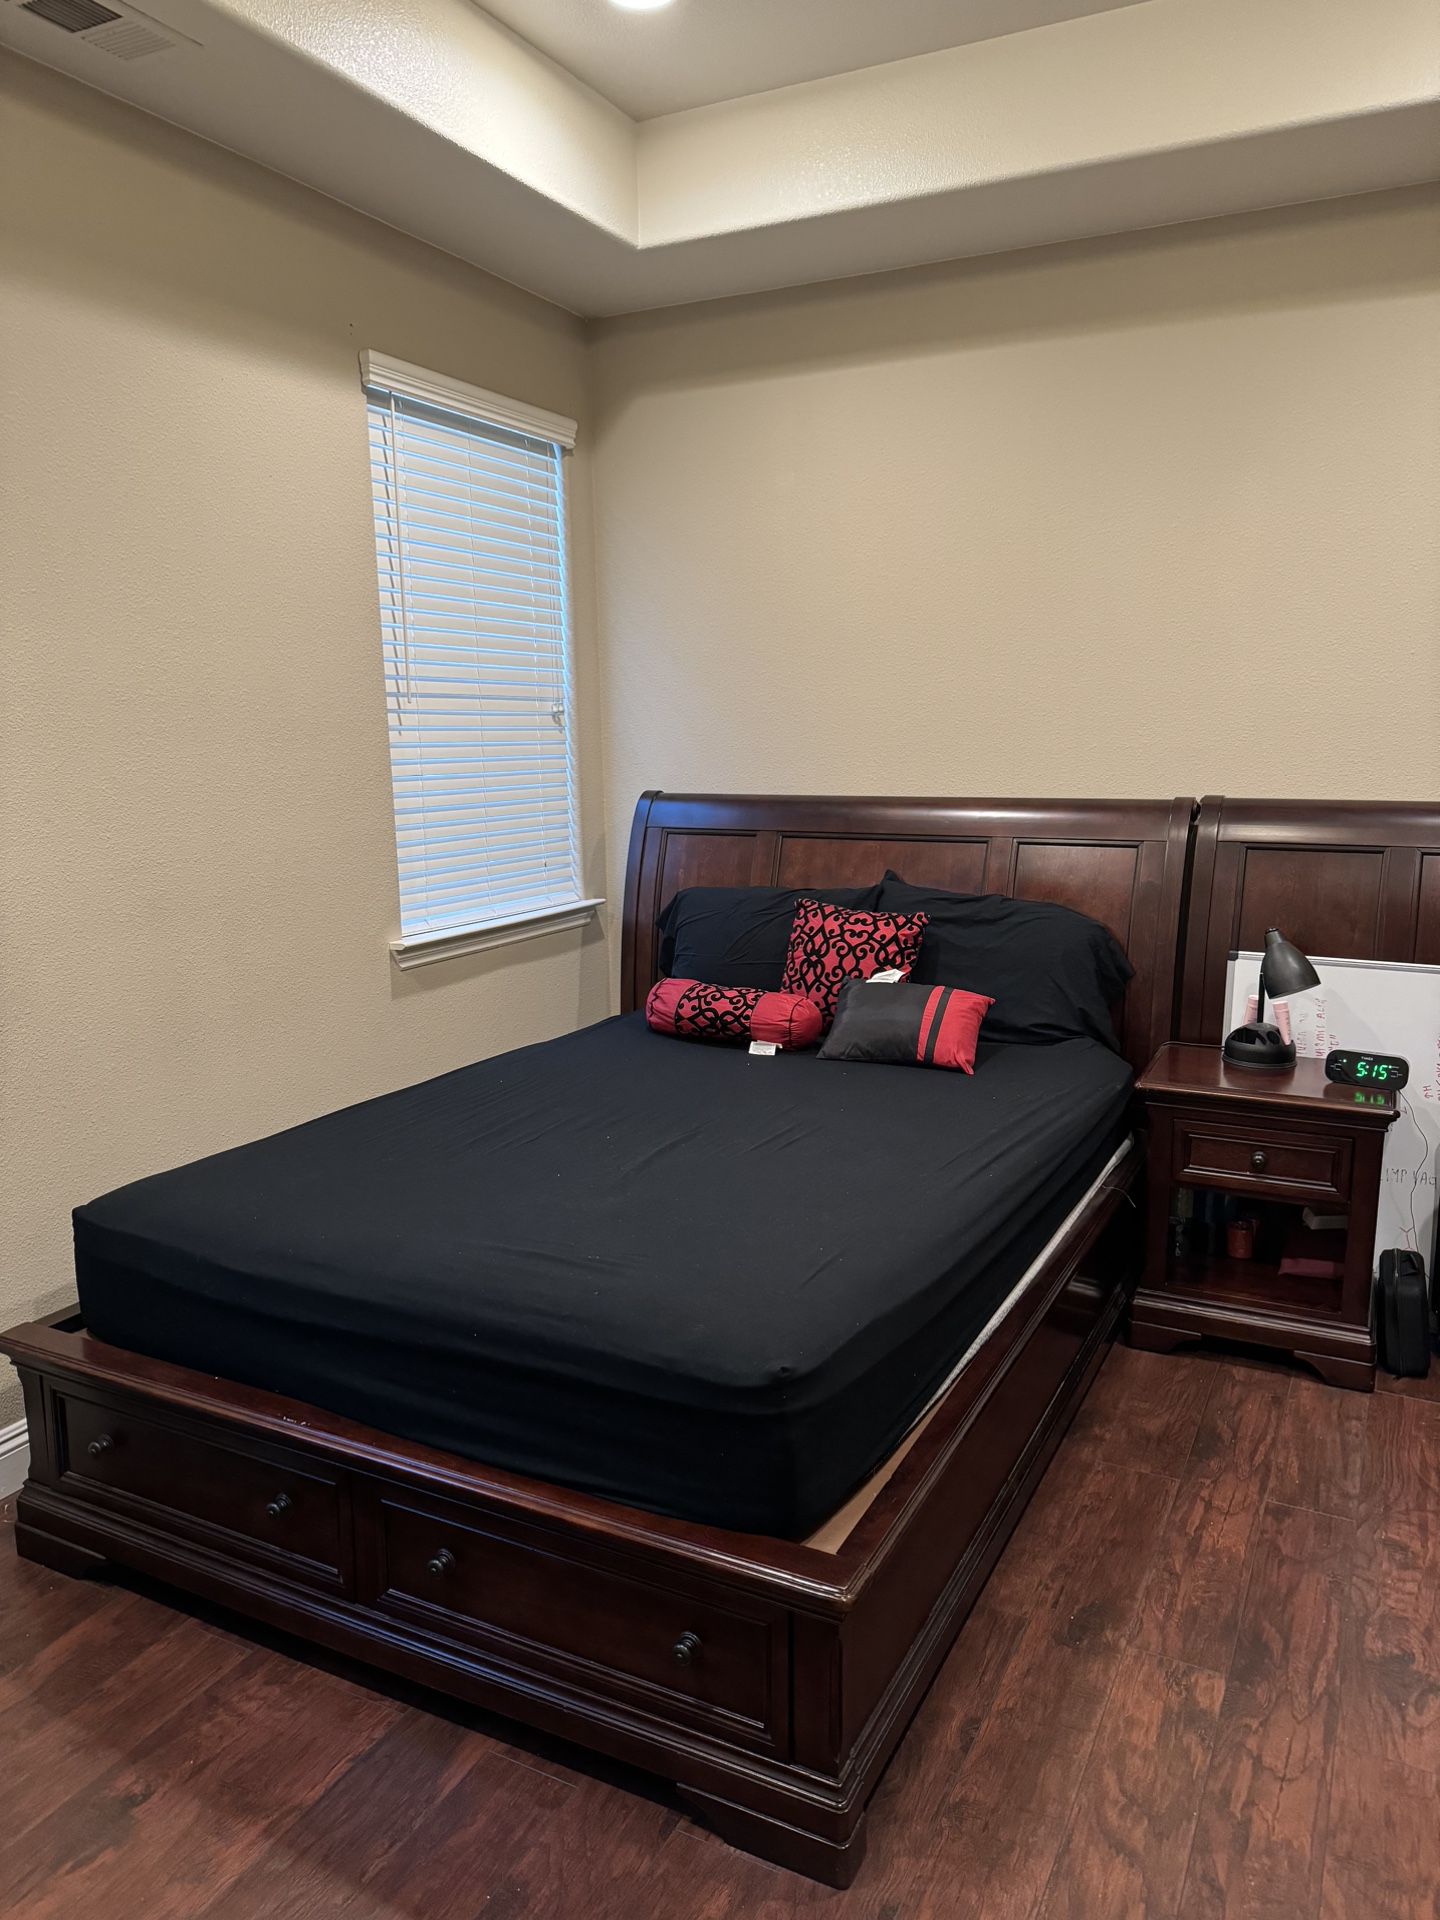 Solid Wood, Sleigh Bed Frame And Nightstand- QUEEN